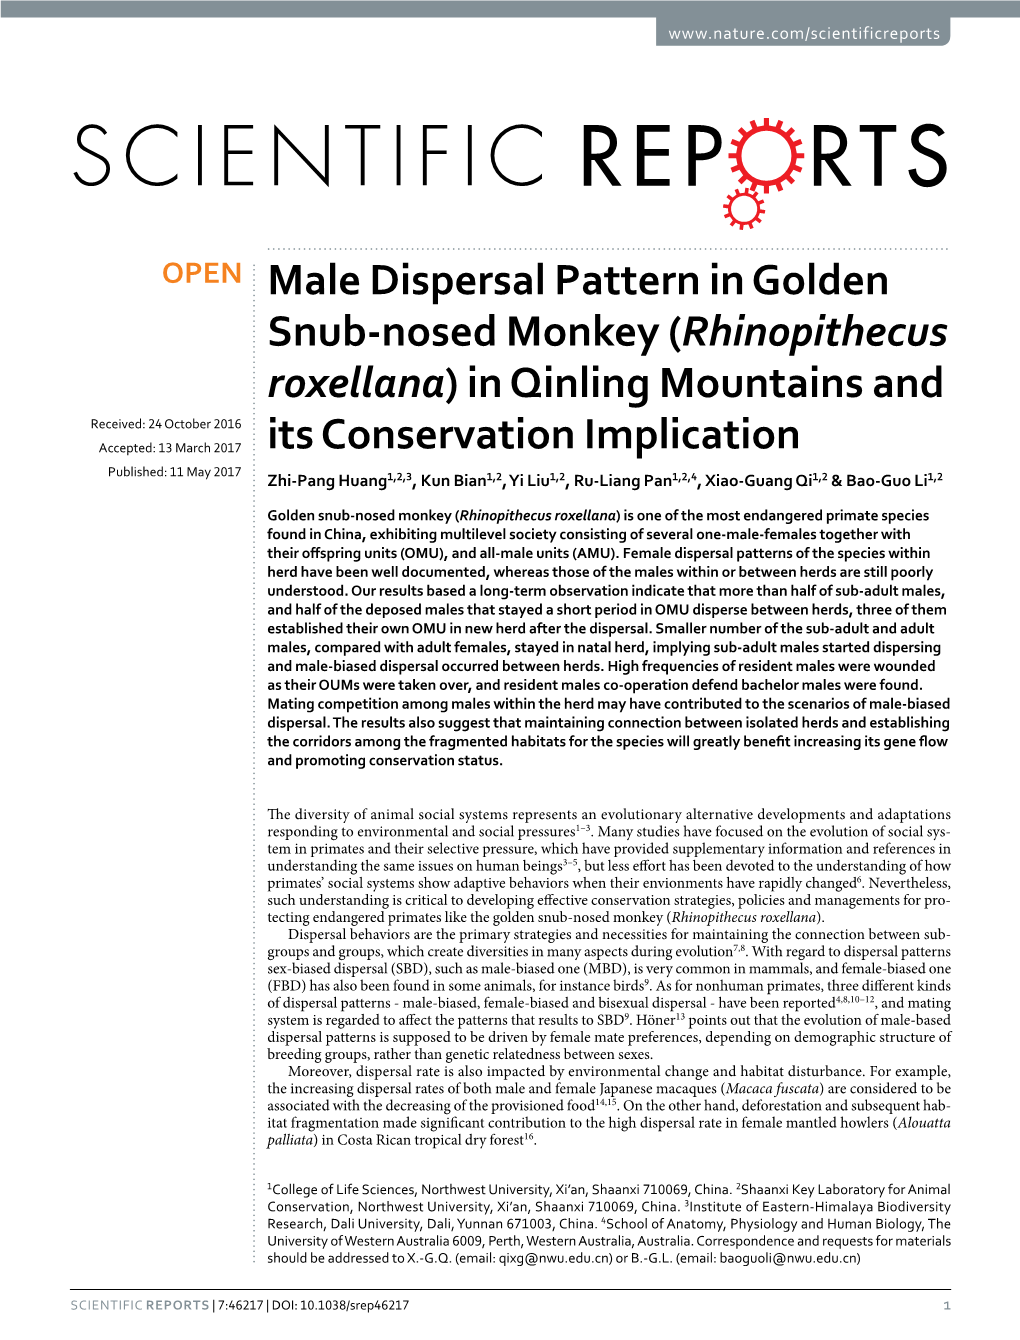 Male Dispersal Pattern in Golden Snub-Nosed Monkey (Rhinopithecus Roxellana) in Qinling Mountains and Its Conservation Implication